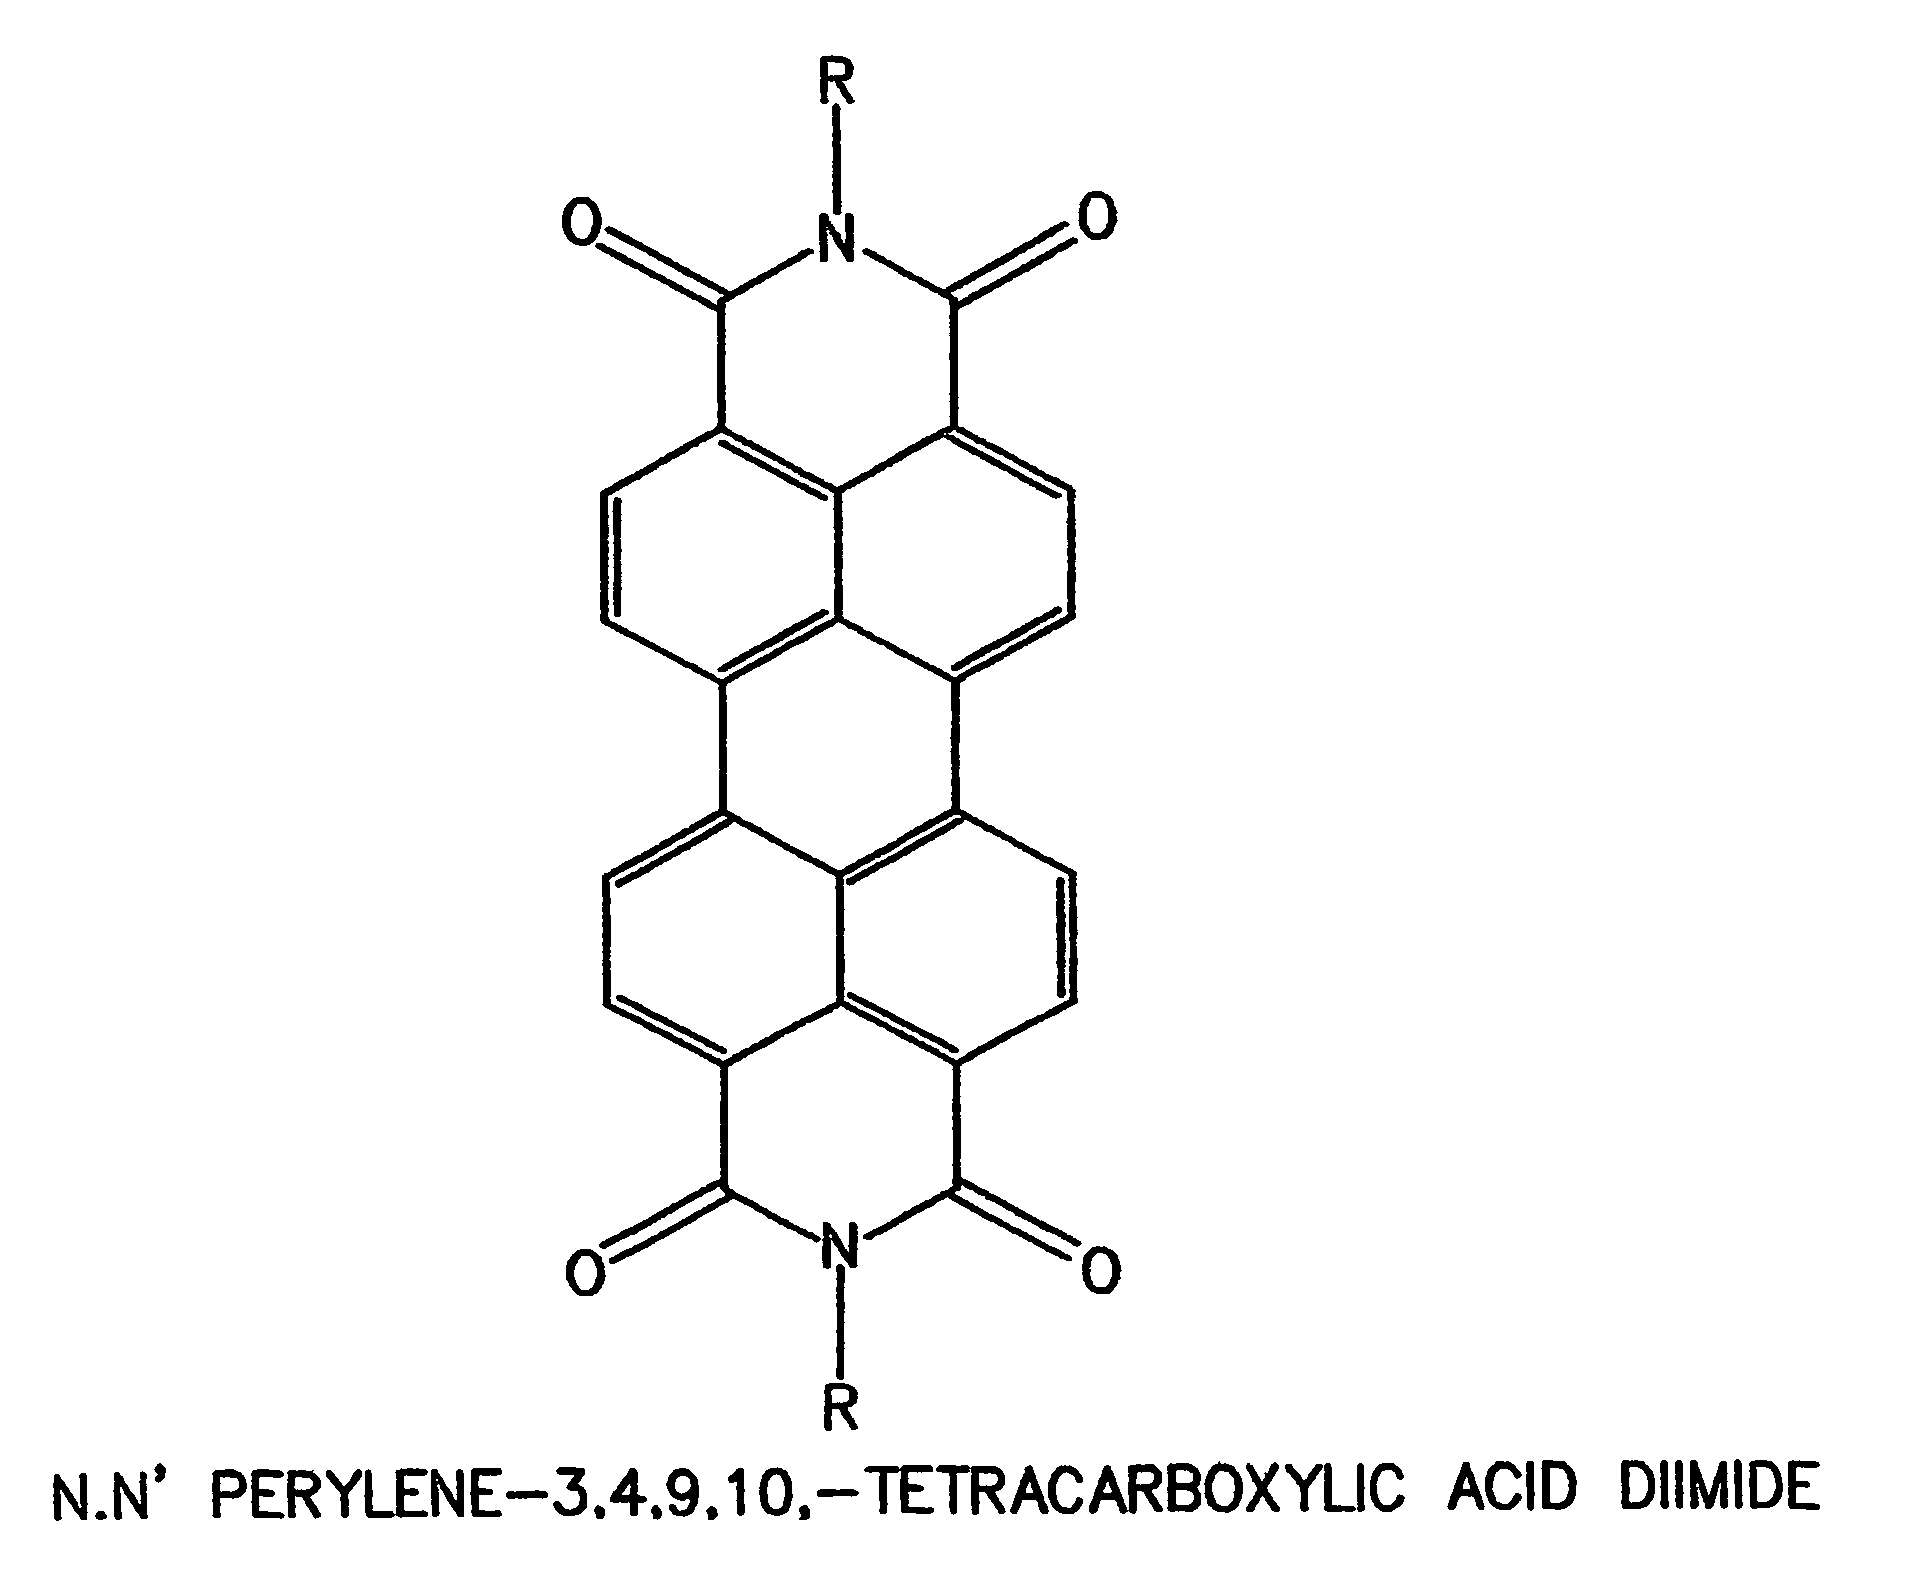 Organic n-channel semiconductor device of N,N' 3,4,9,10 perylene tetracarboxylic diimide